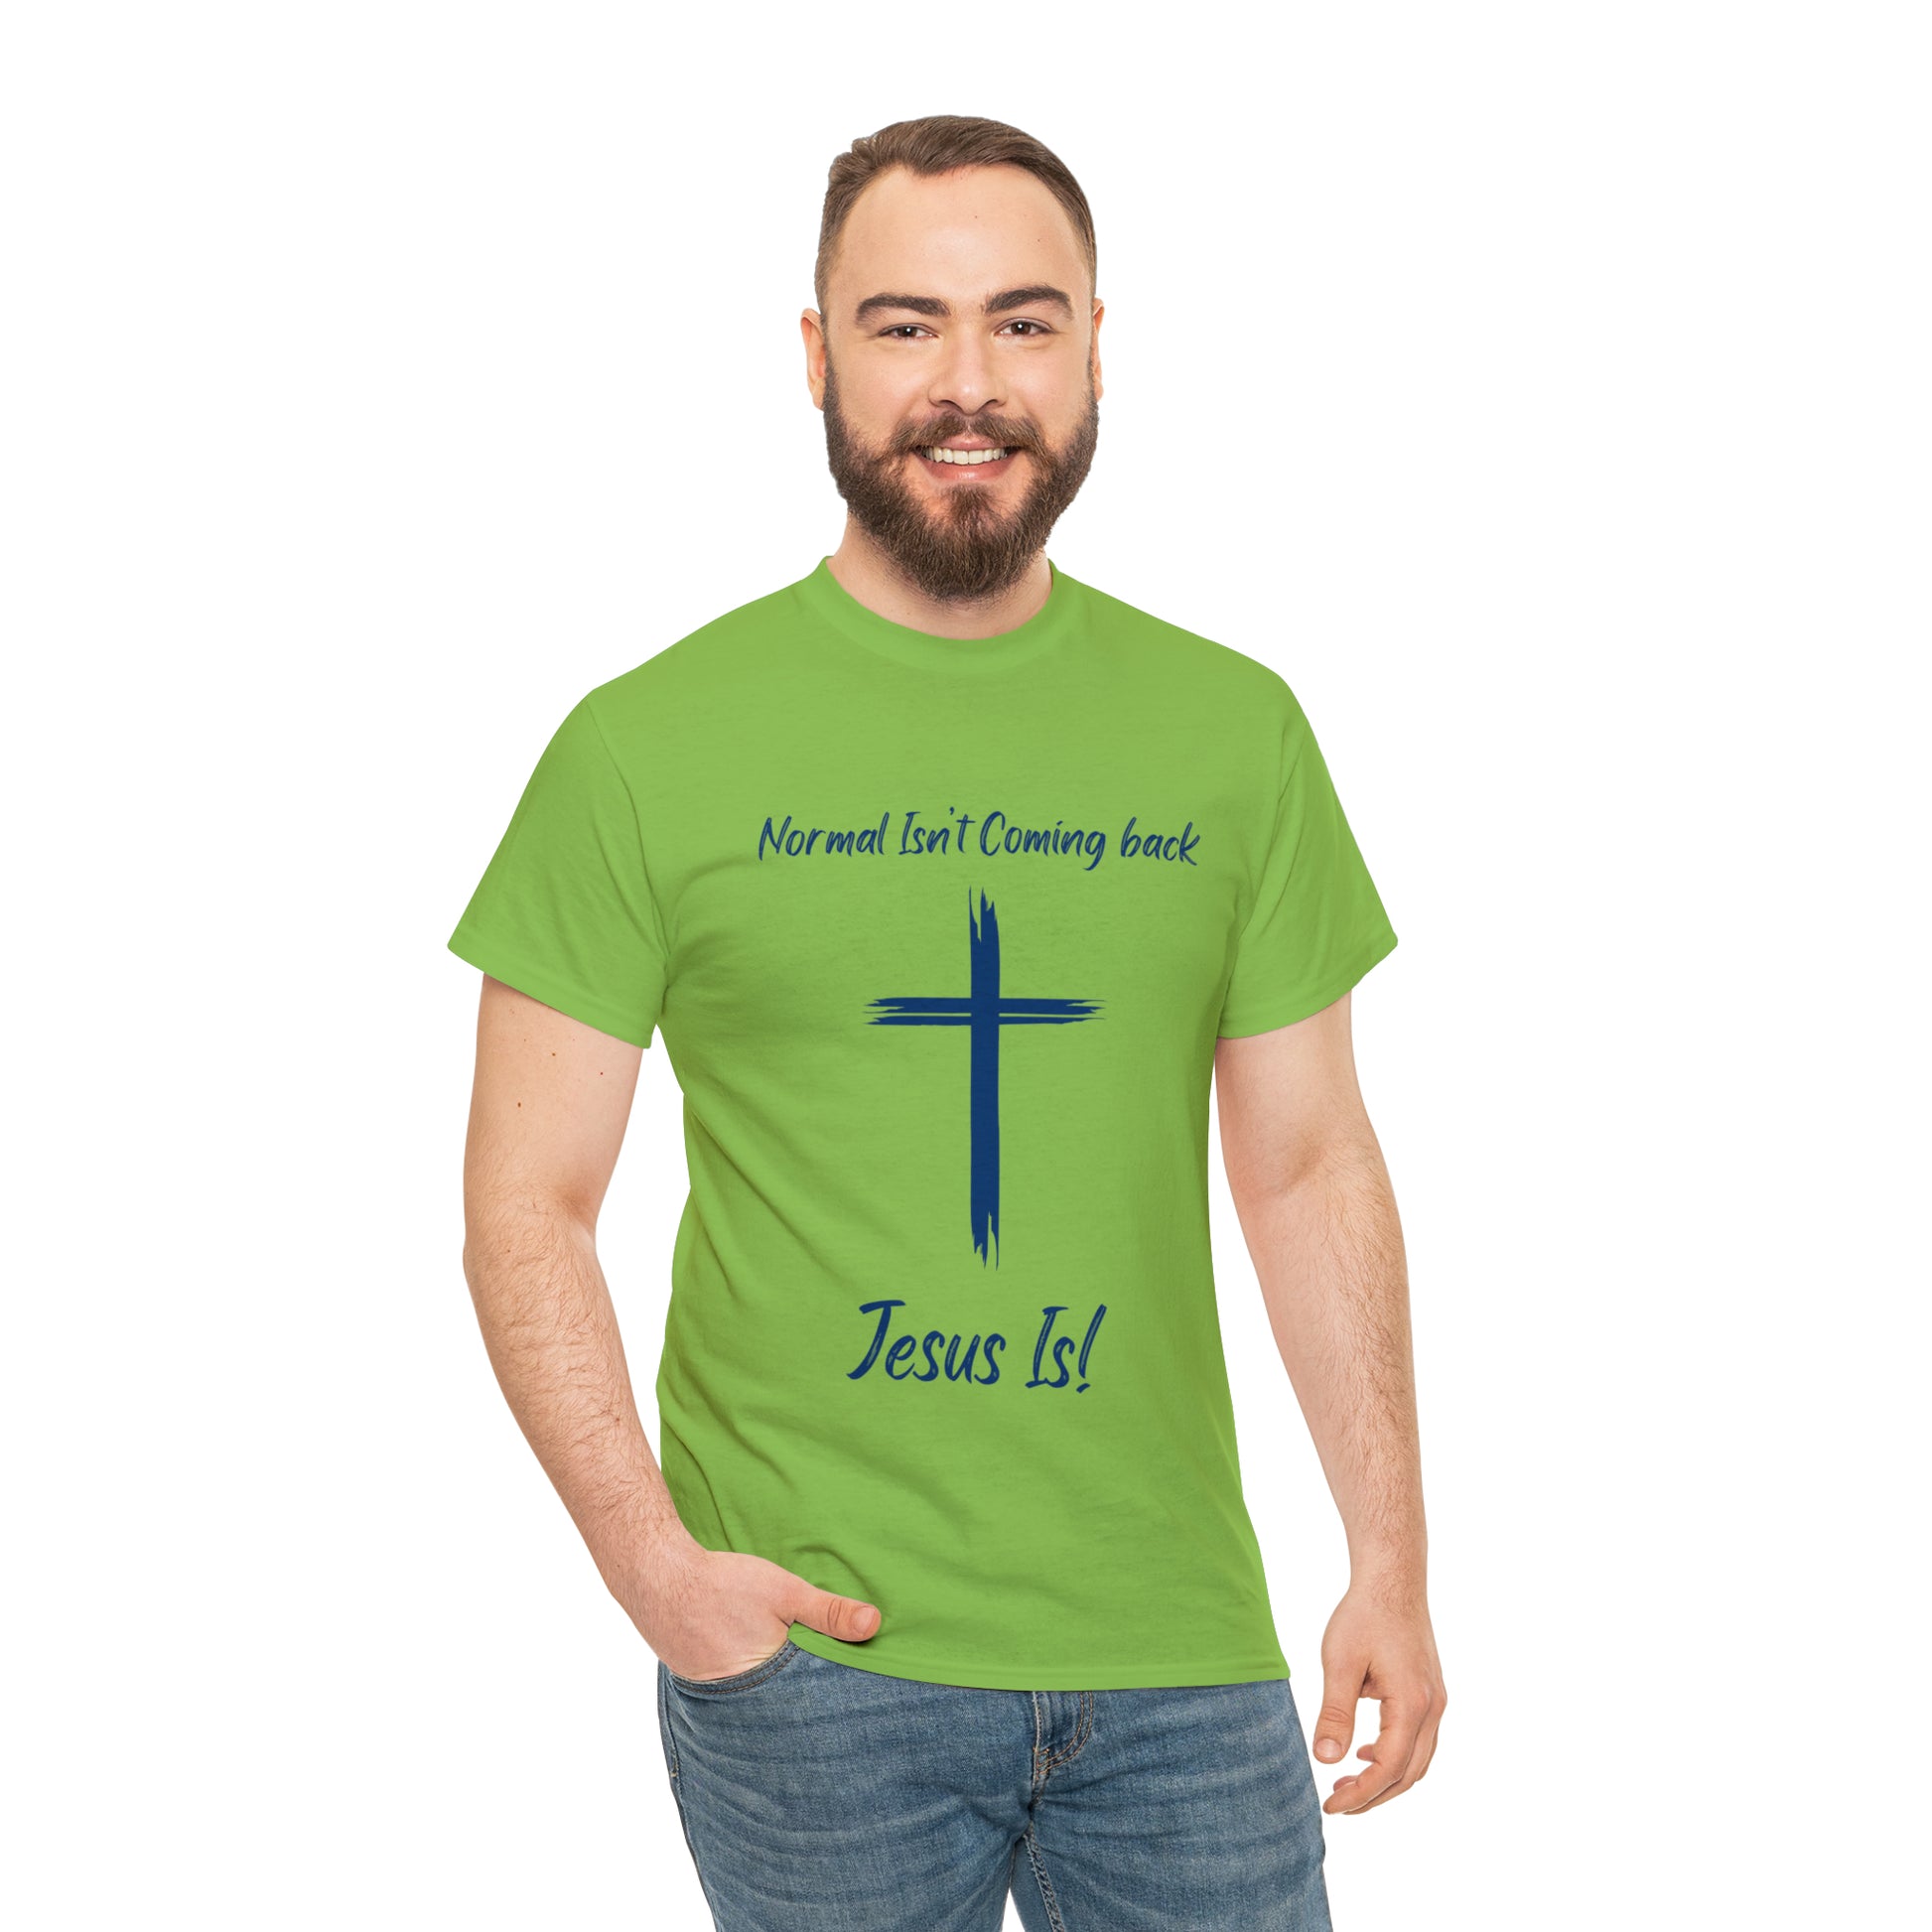 "Normal Isn't Coming Back, Jesus Is" T-Shirt - Weave Got Gifts - Unique Gifts You Won’t Find Anywhere Else!